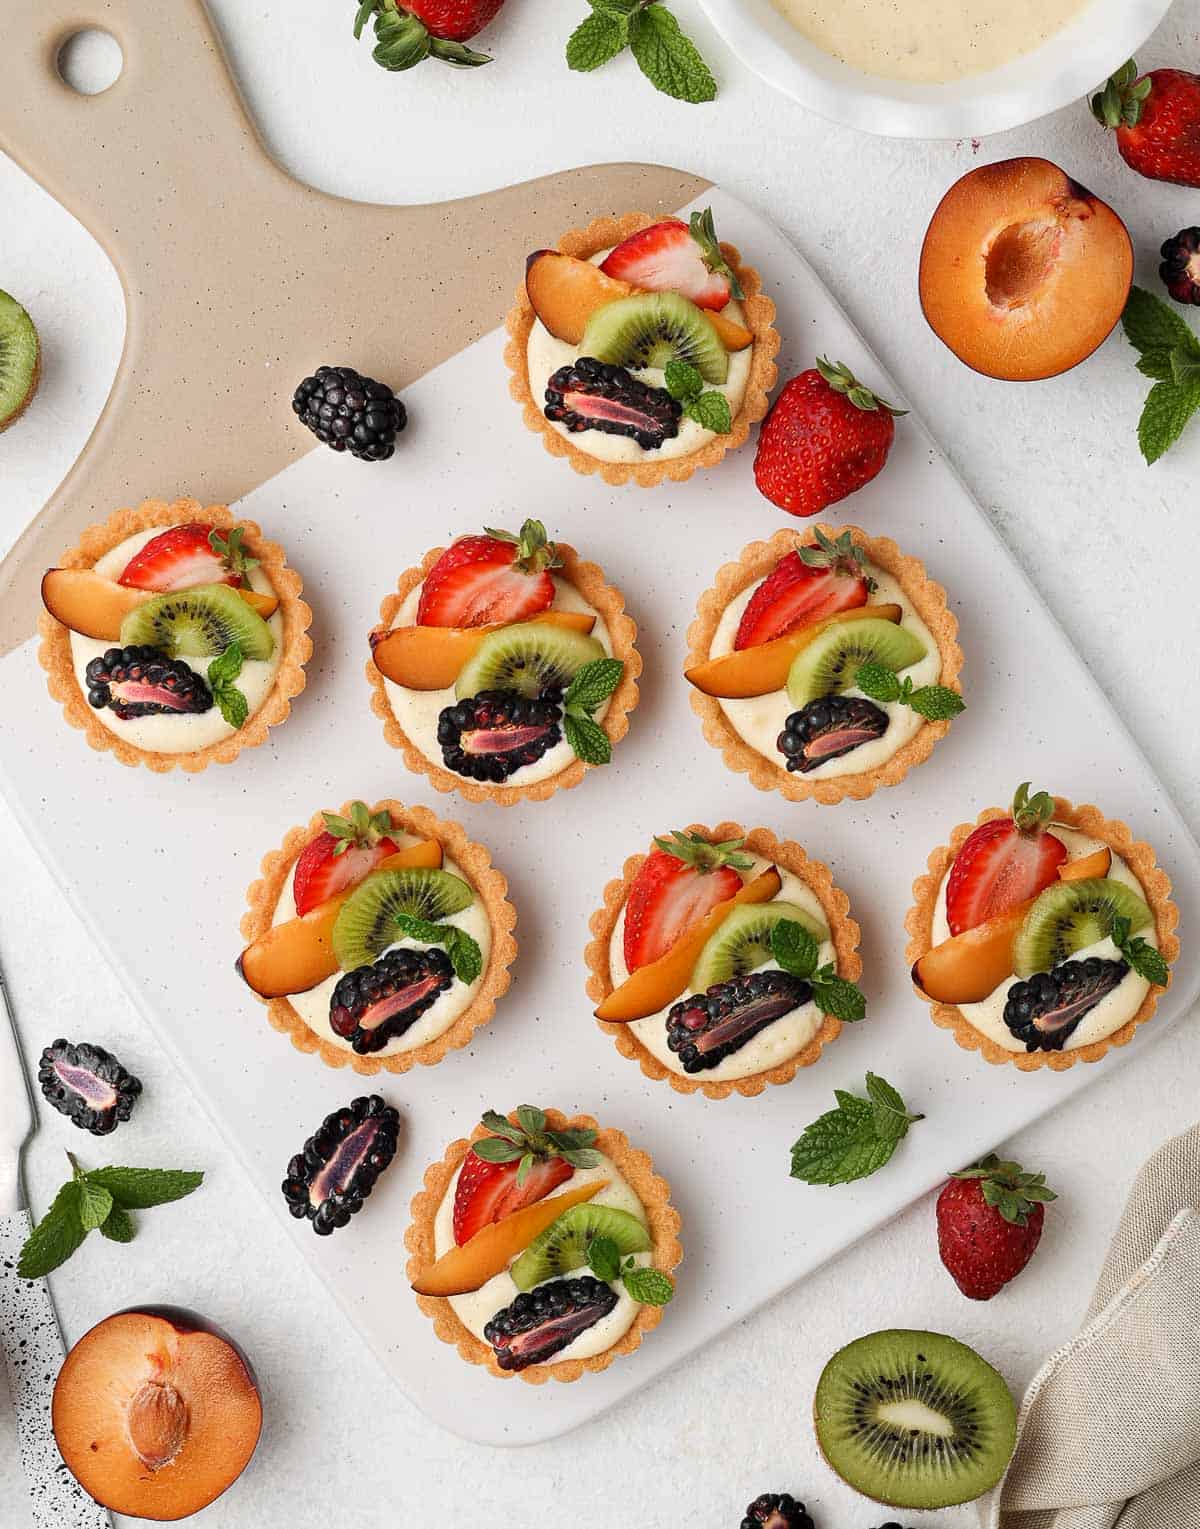 Tartlets on a serving board seen from above.